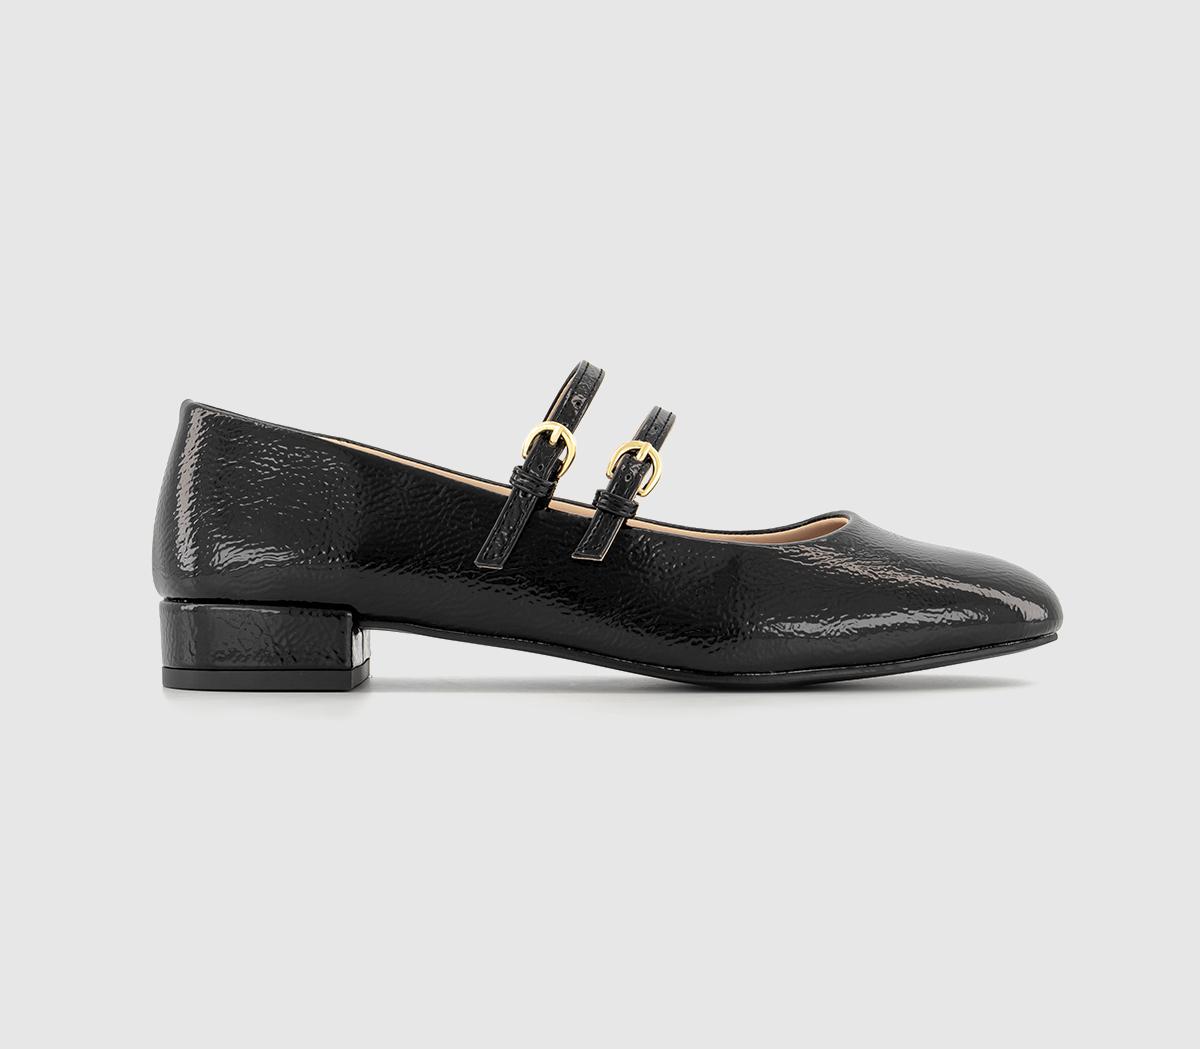 OFFICEFrenchkiss patent Two Strap Mary JanesNew Black